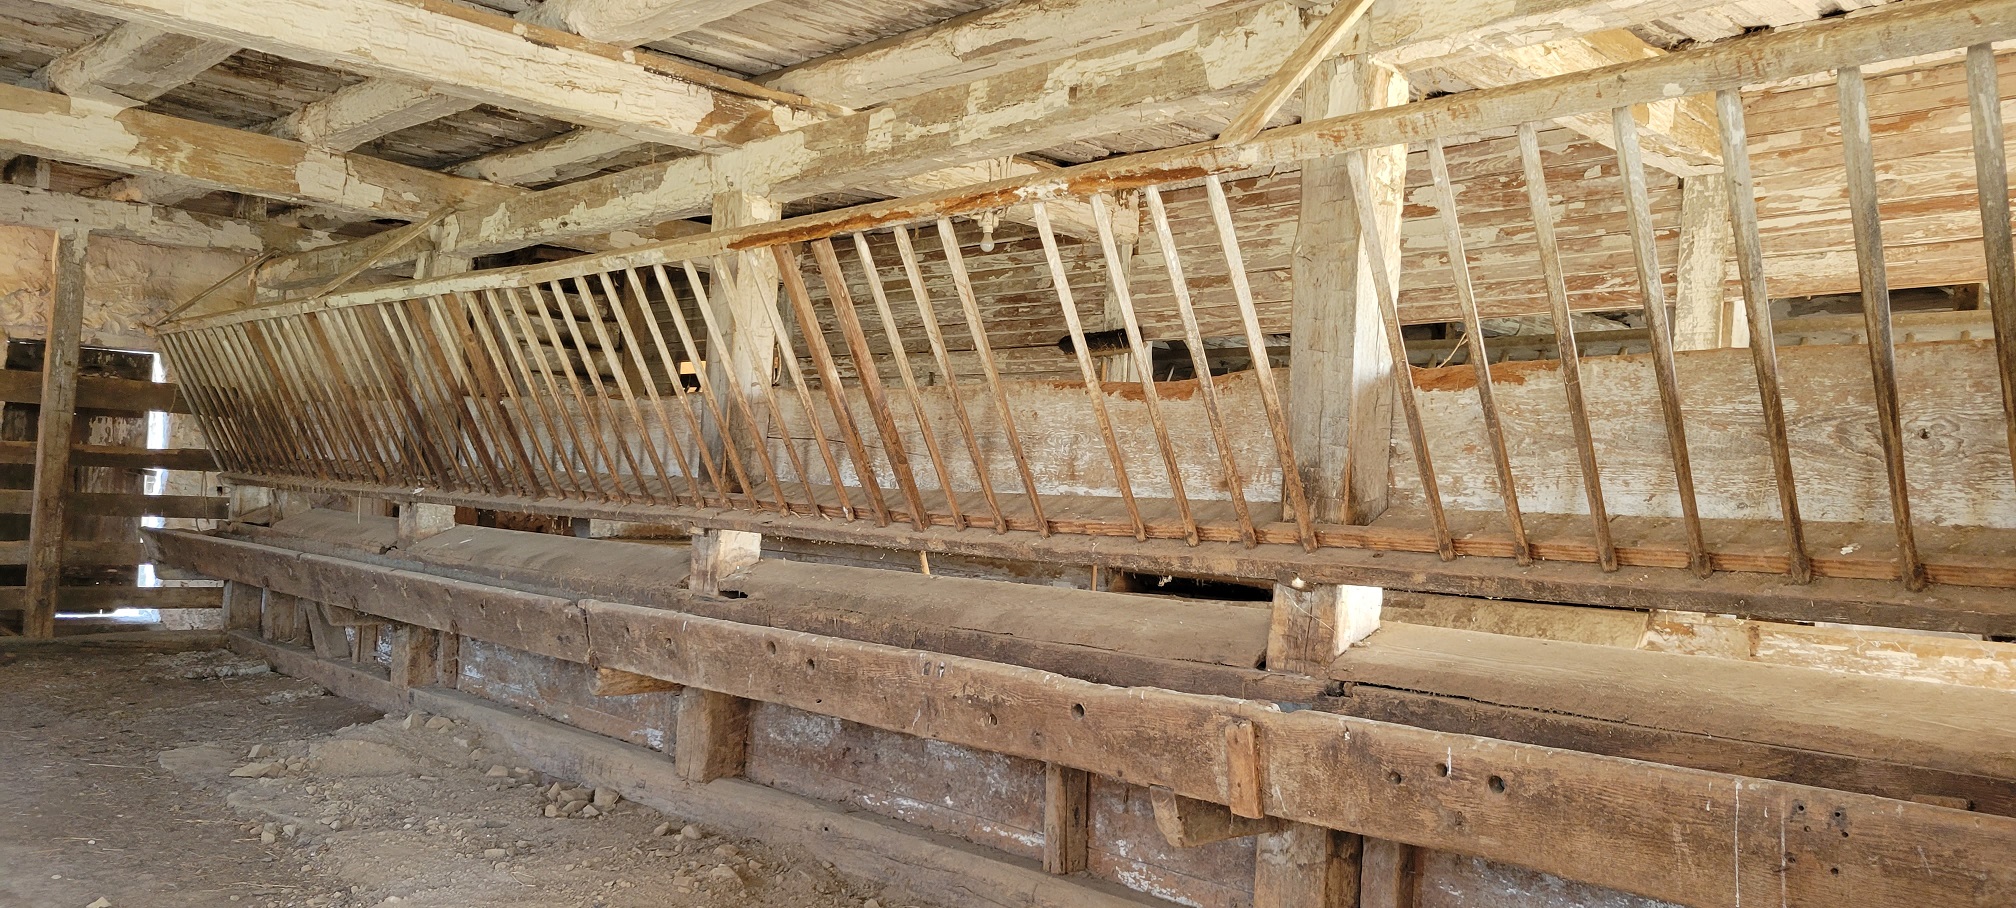 Interior wood structure of barn.